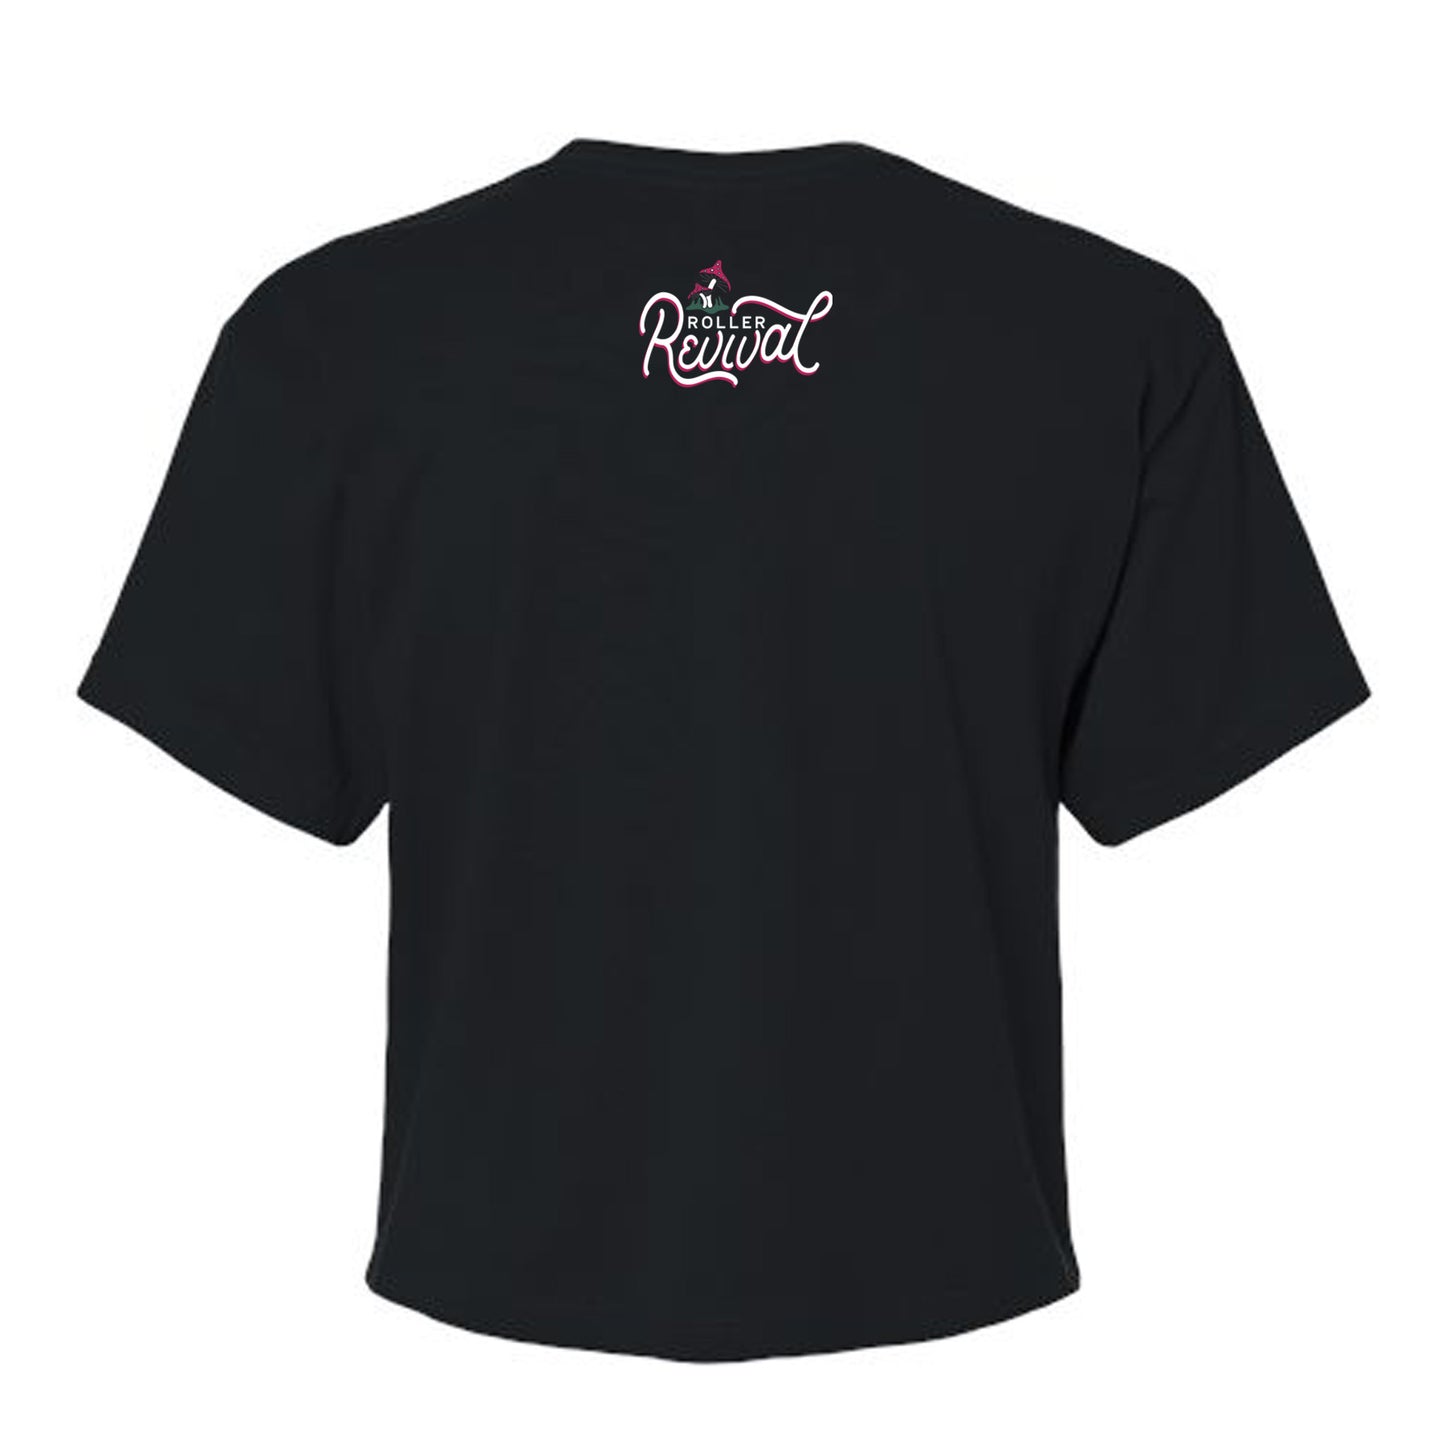 Join Us at the Roller Derby Black Crop Top